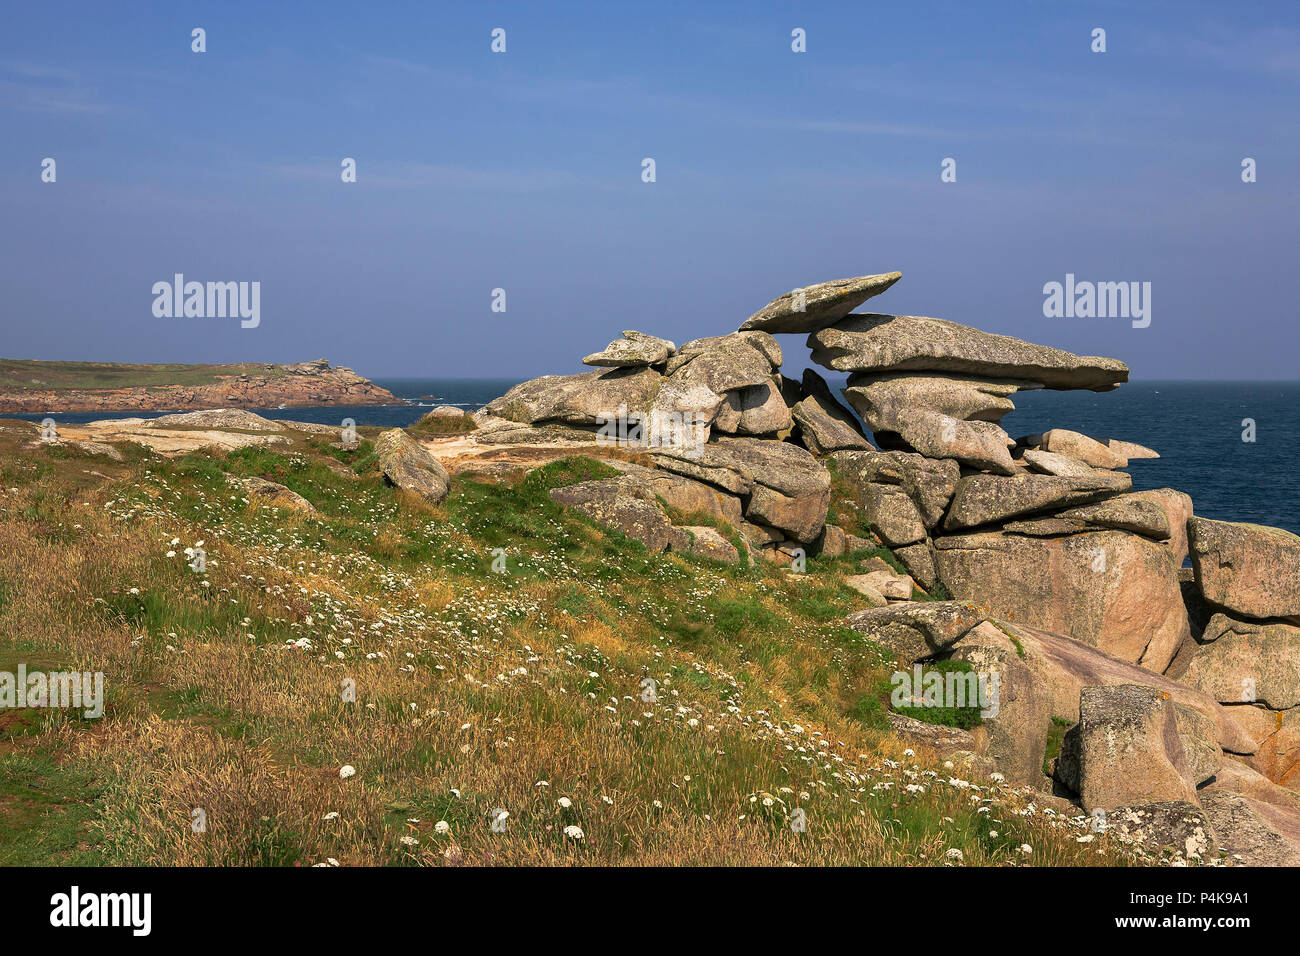 Il pulpito Rock, Peninnis Testa, St. Mary's, Isole Scilly Foto Stock